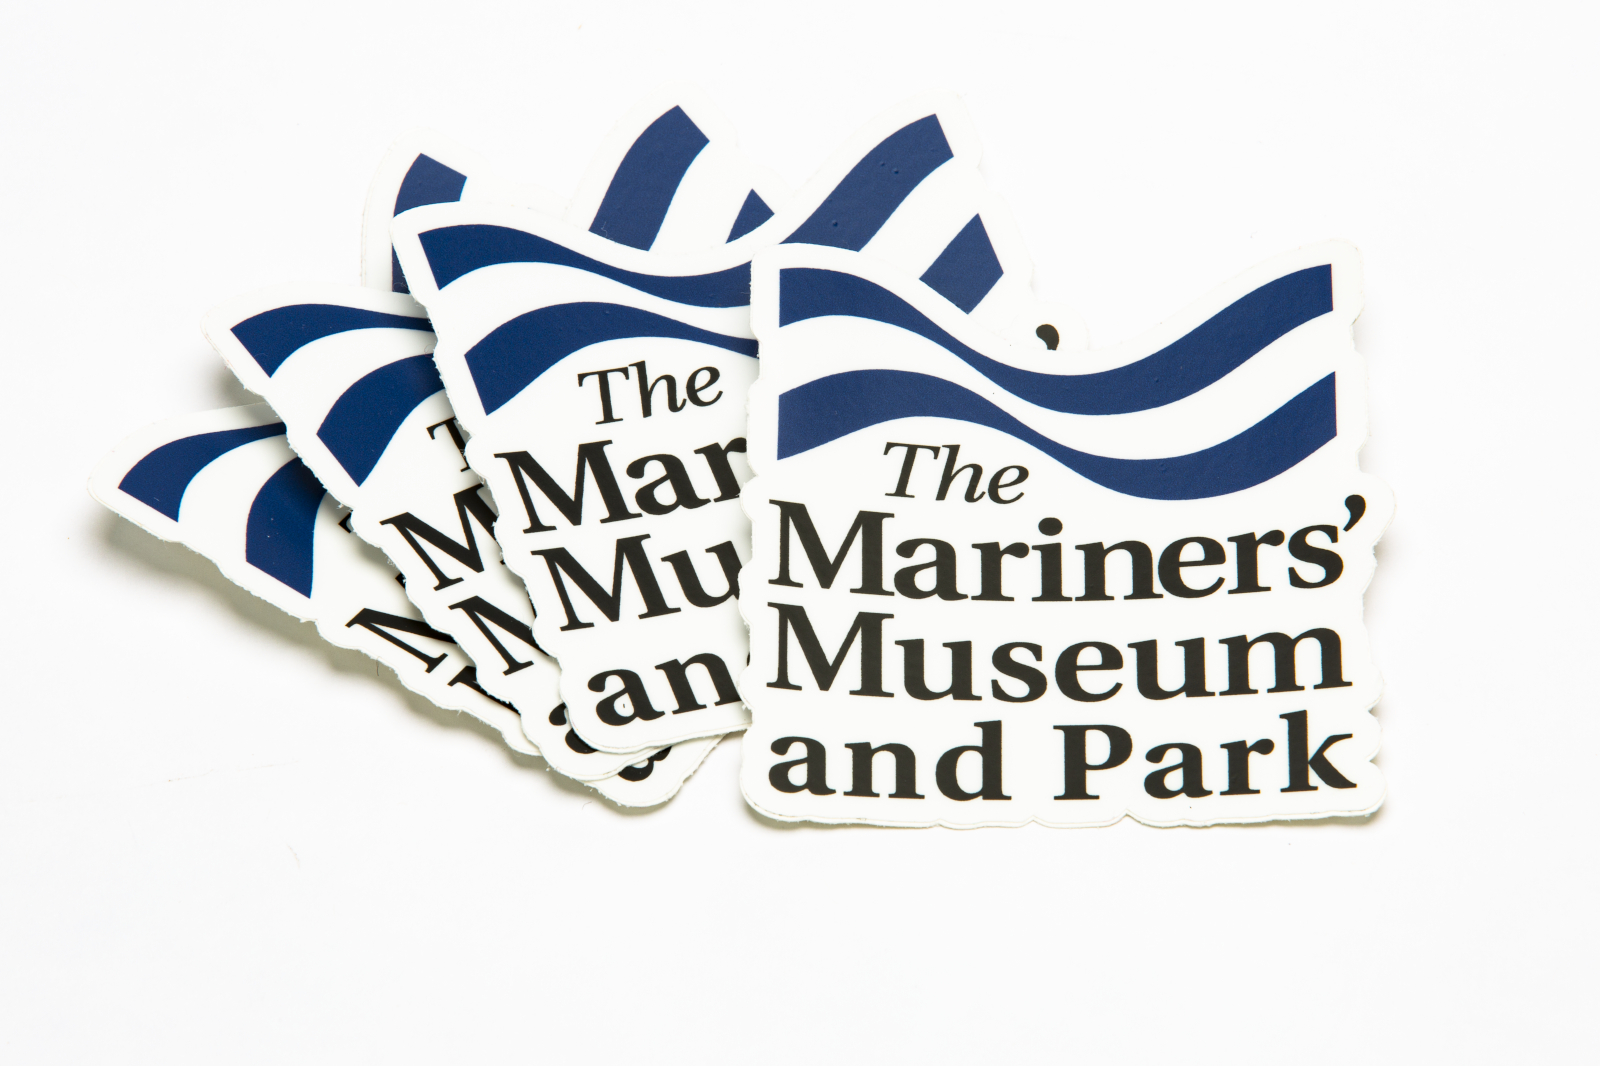 Mariners' Museum and Park logo stickers